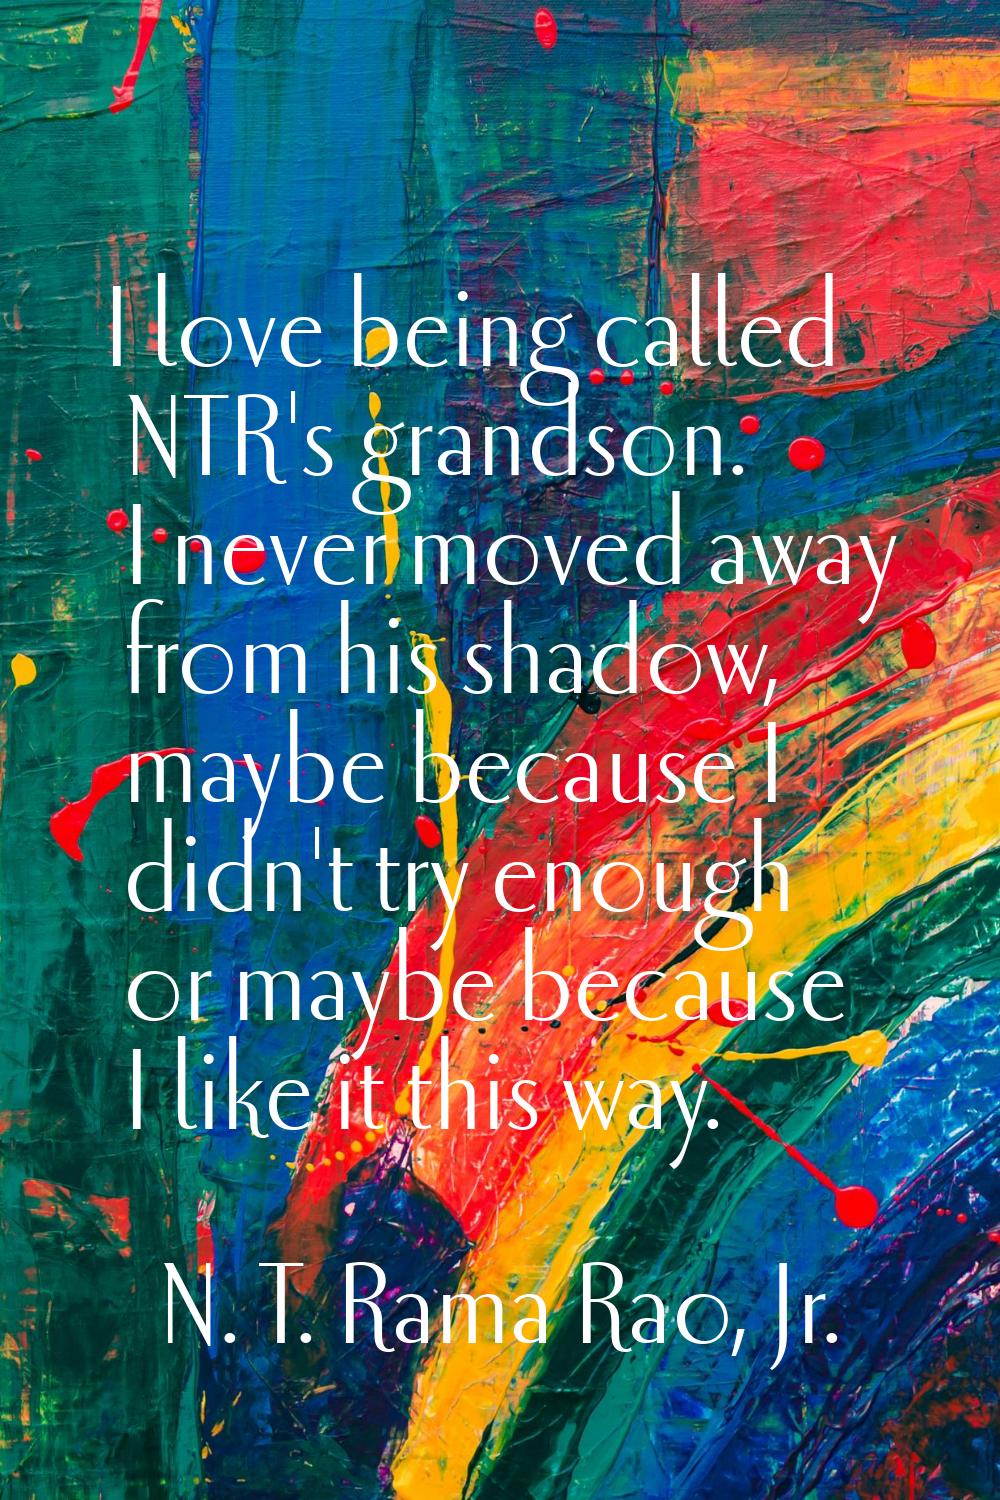 I love being called NTR's grandson. I never moved away from his shadow, maybe because I didn't try 